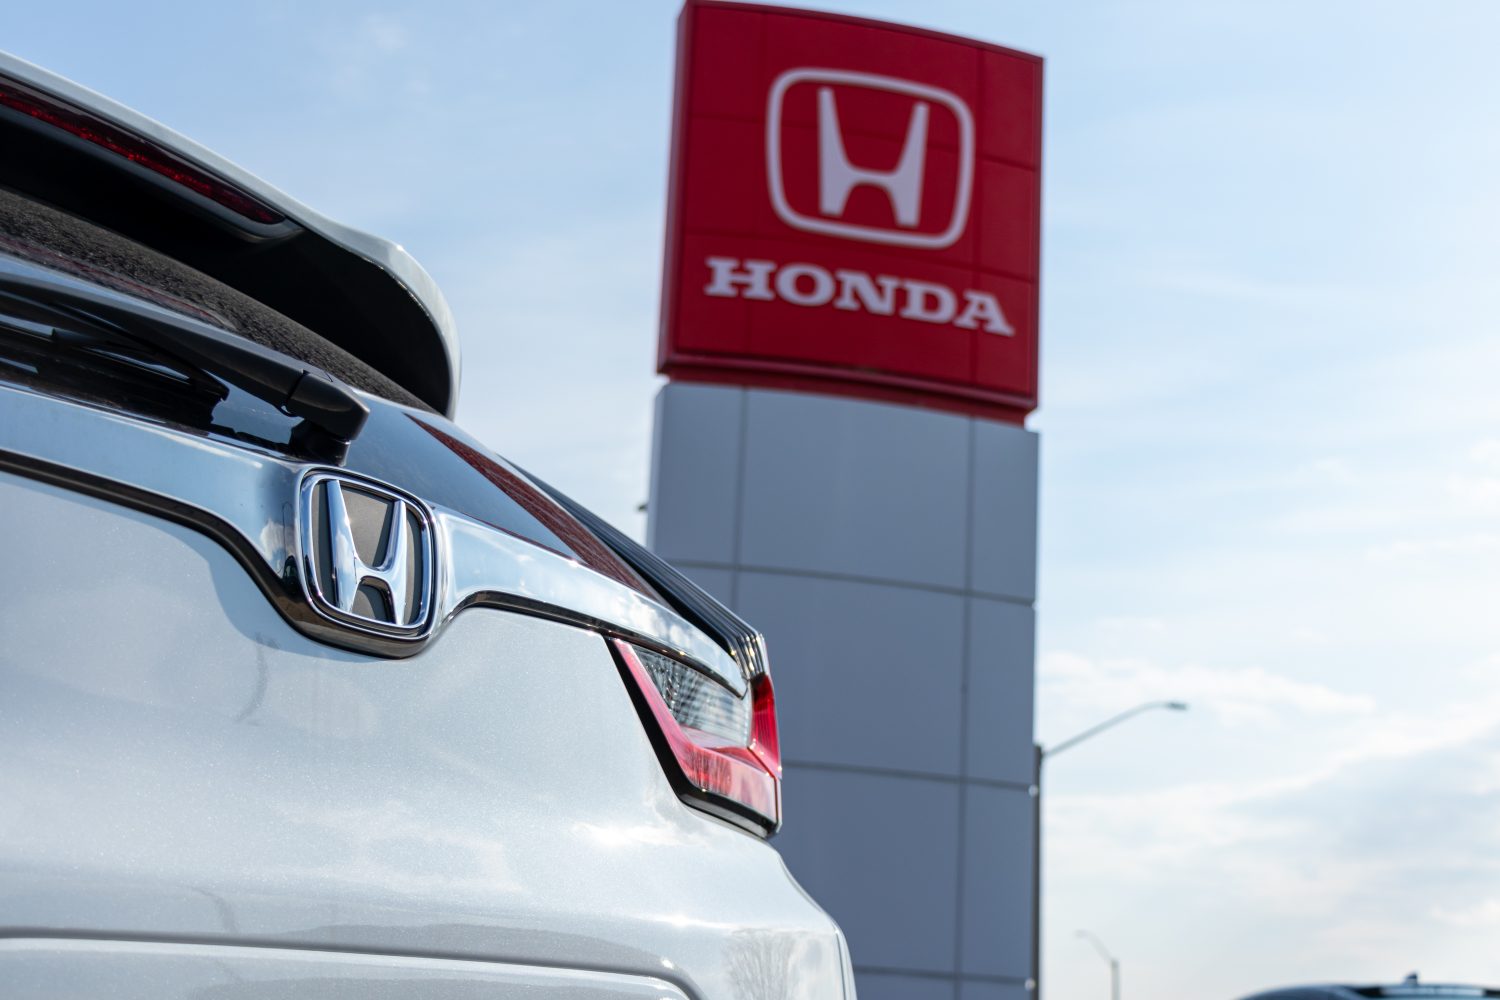 The NHTSA said that Honda Motor's American division is recalling around 2.5 million cars due to a potential fuel pump failure